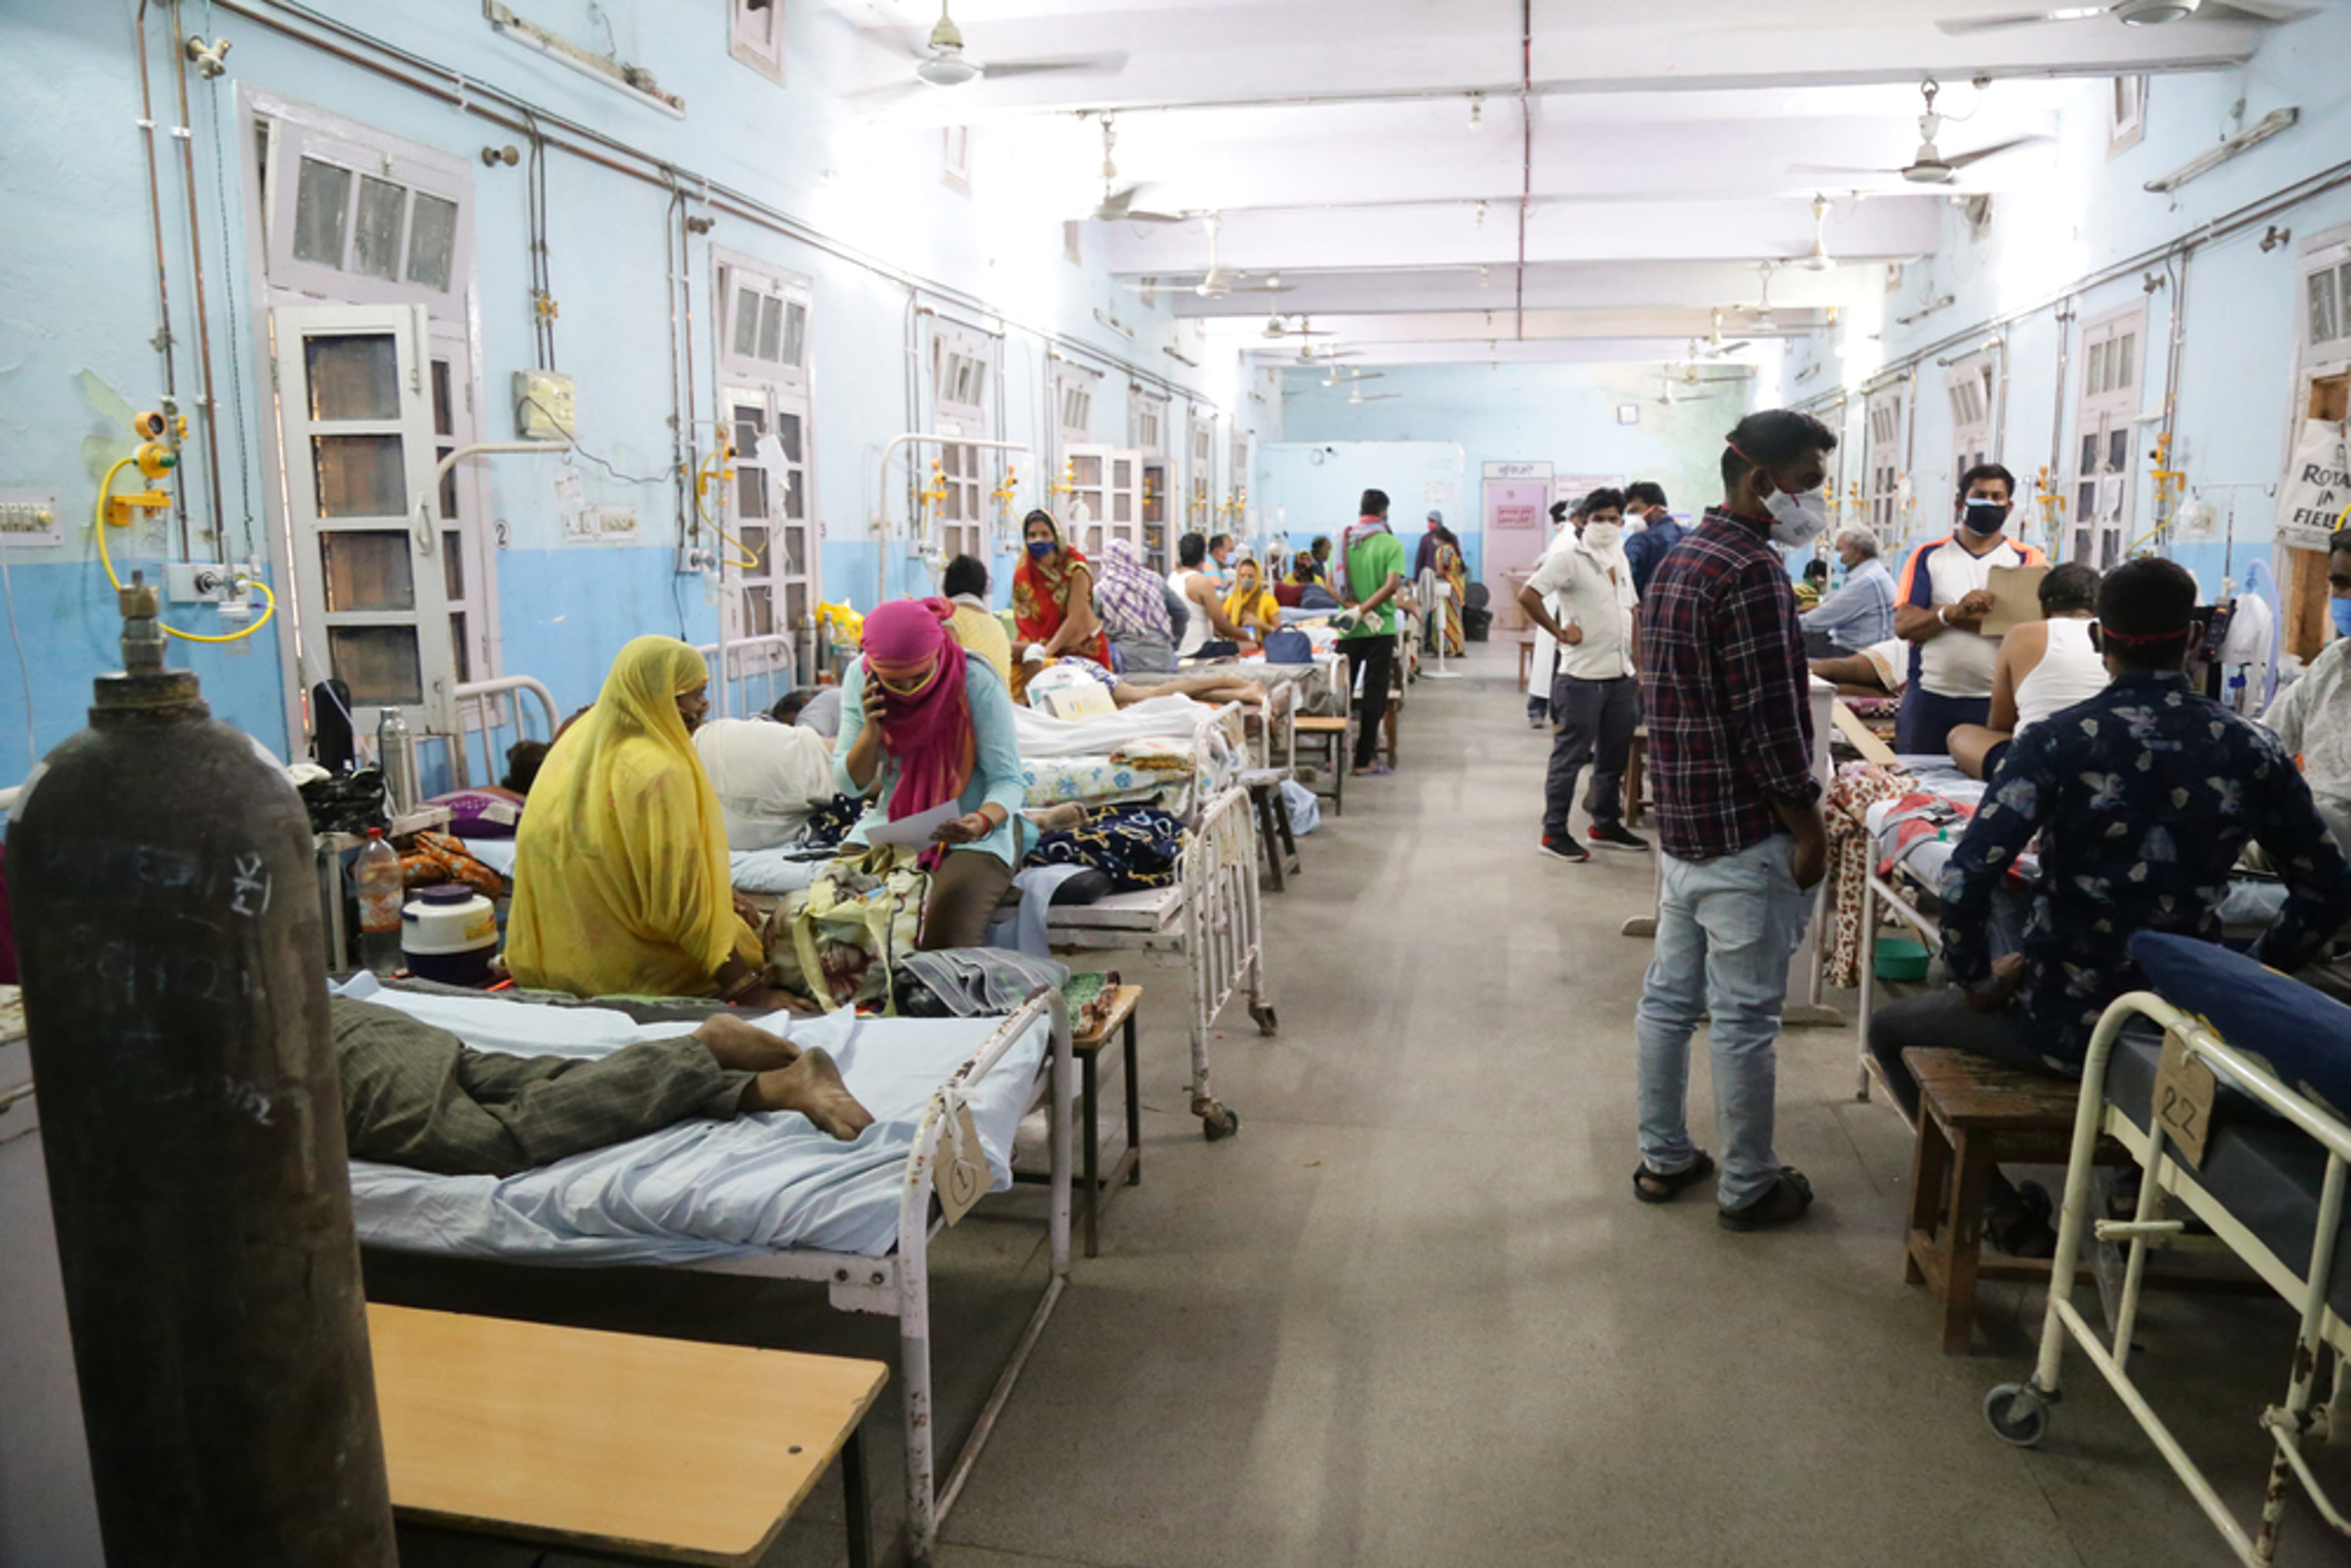 Journalist Calls Out Hospital&#39;s Practices As &#39;Scam&#39;, Calls For Aid From Govt